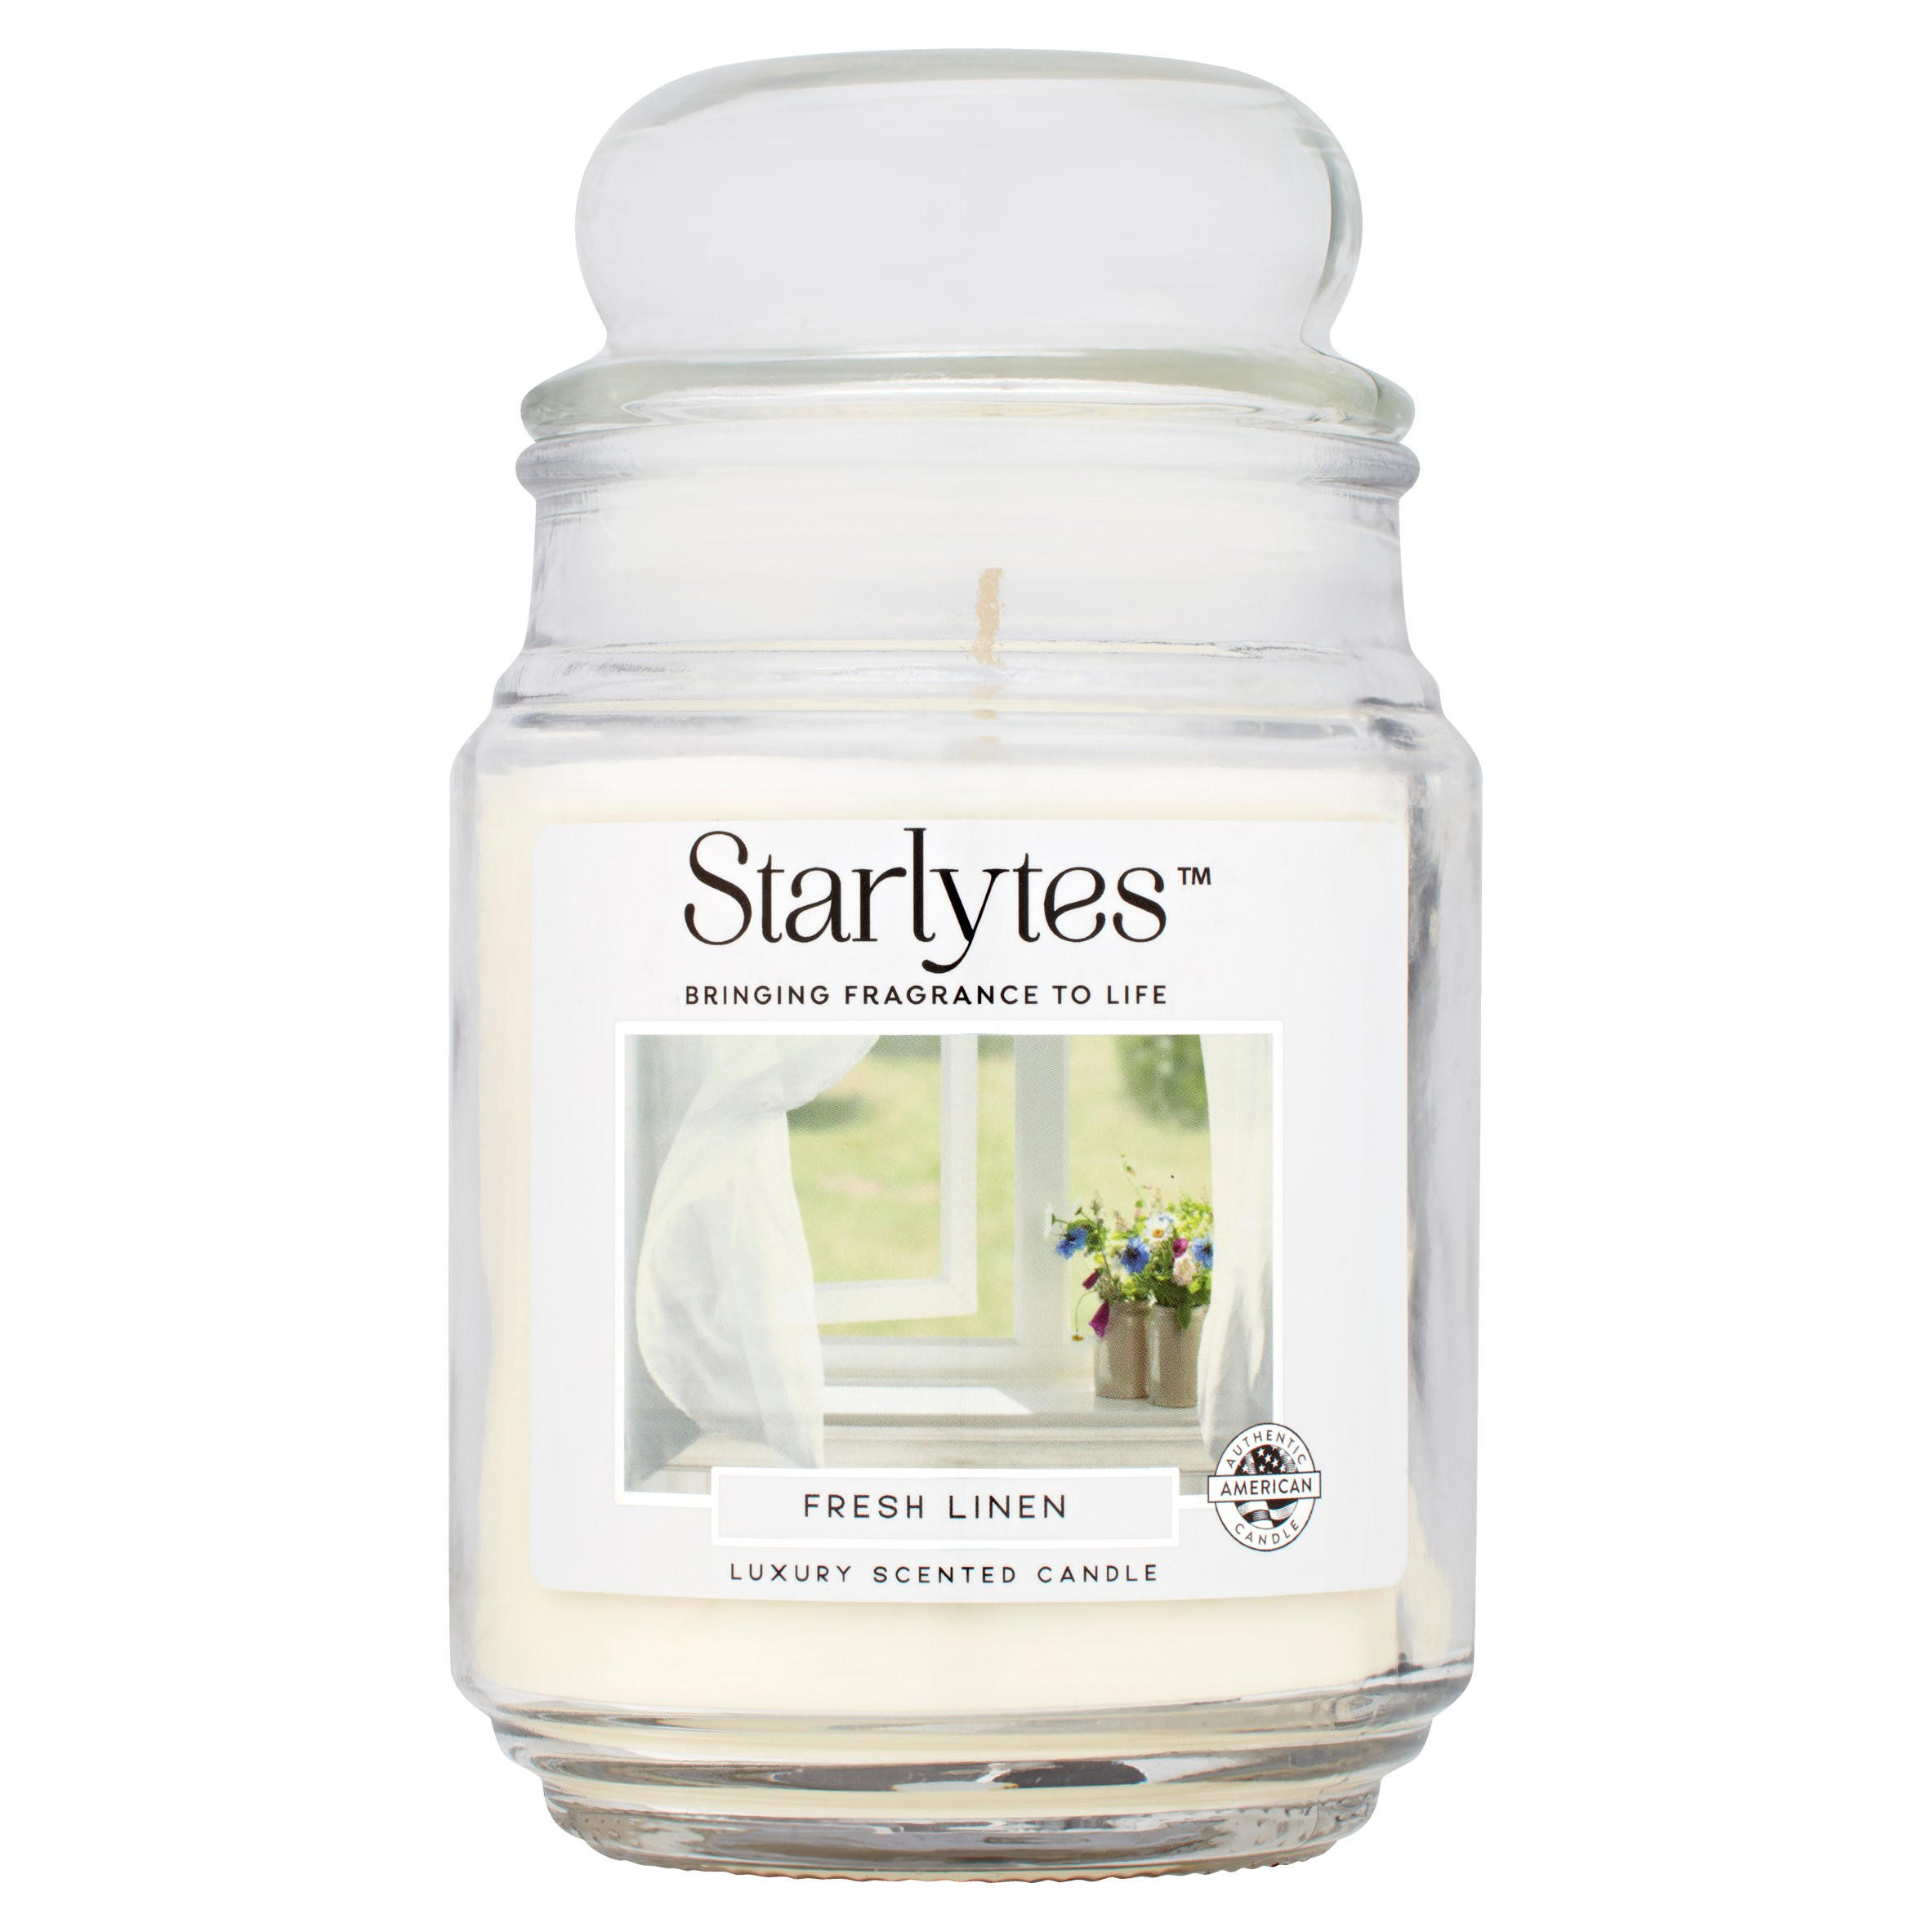 Starlytes Luxury Scented Candle Fresh Linen 510g, Home Accessories